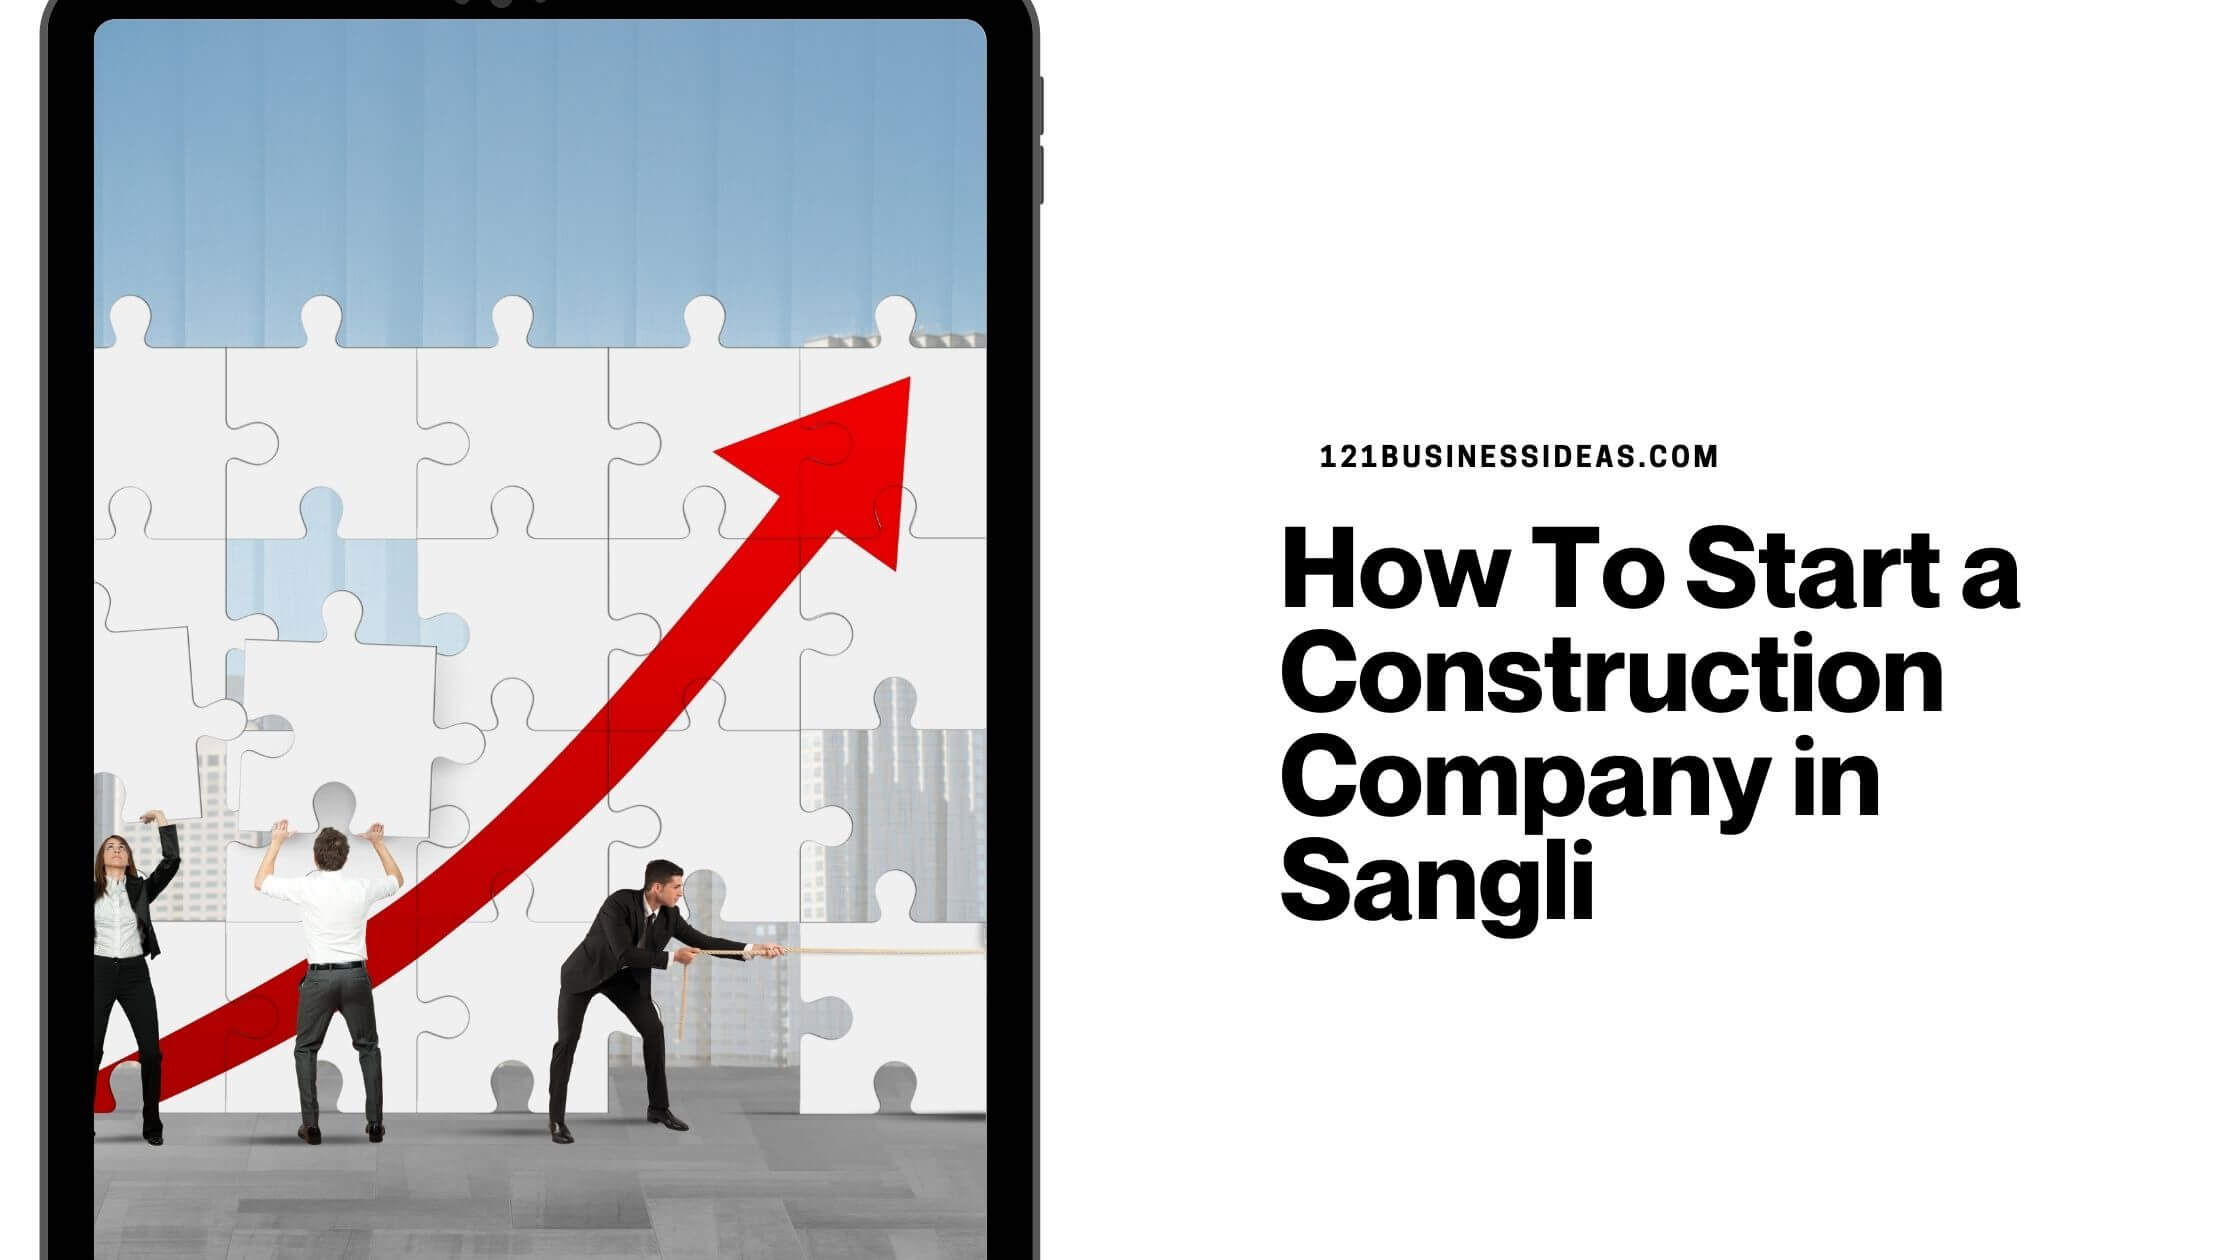 How To Start a Construction Company in Sangli (1)